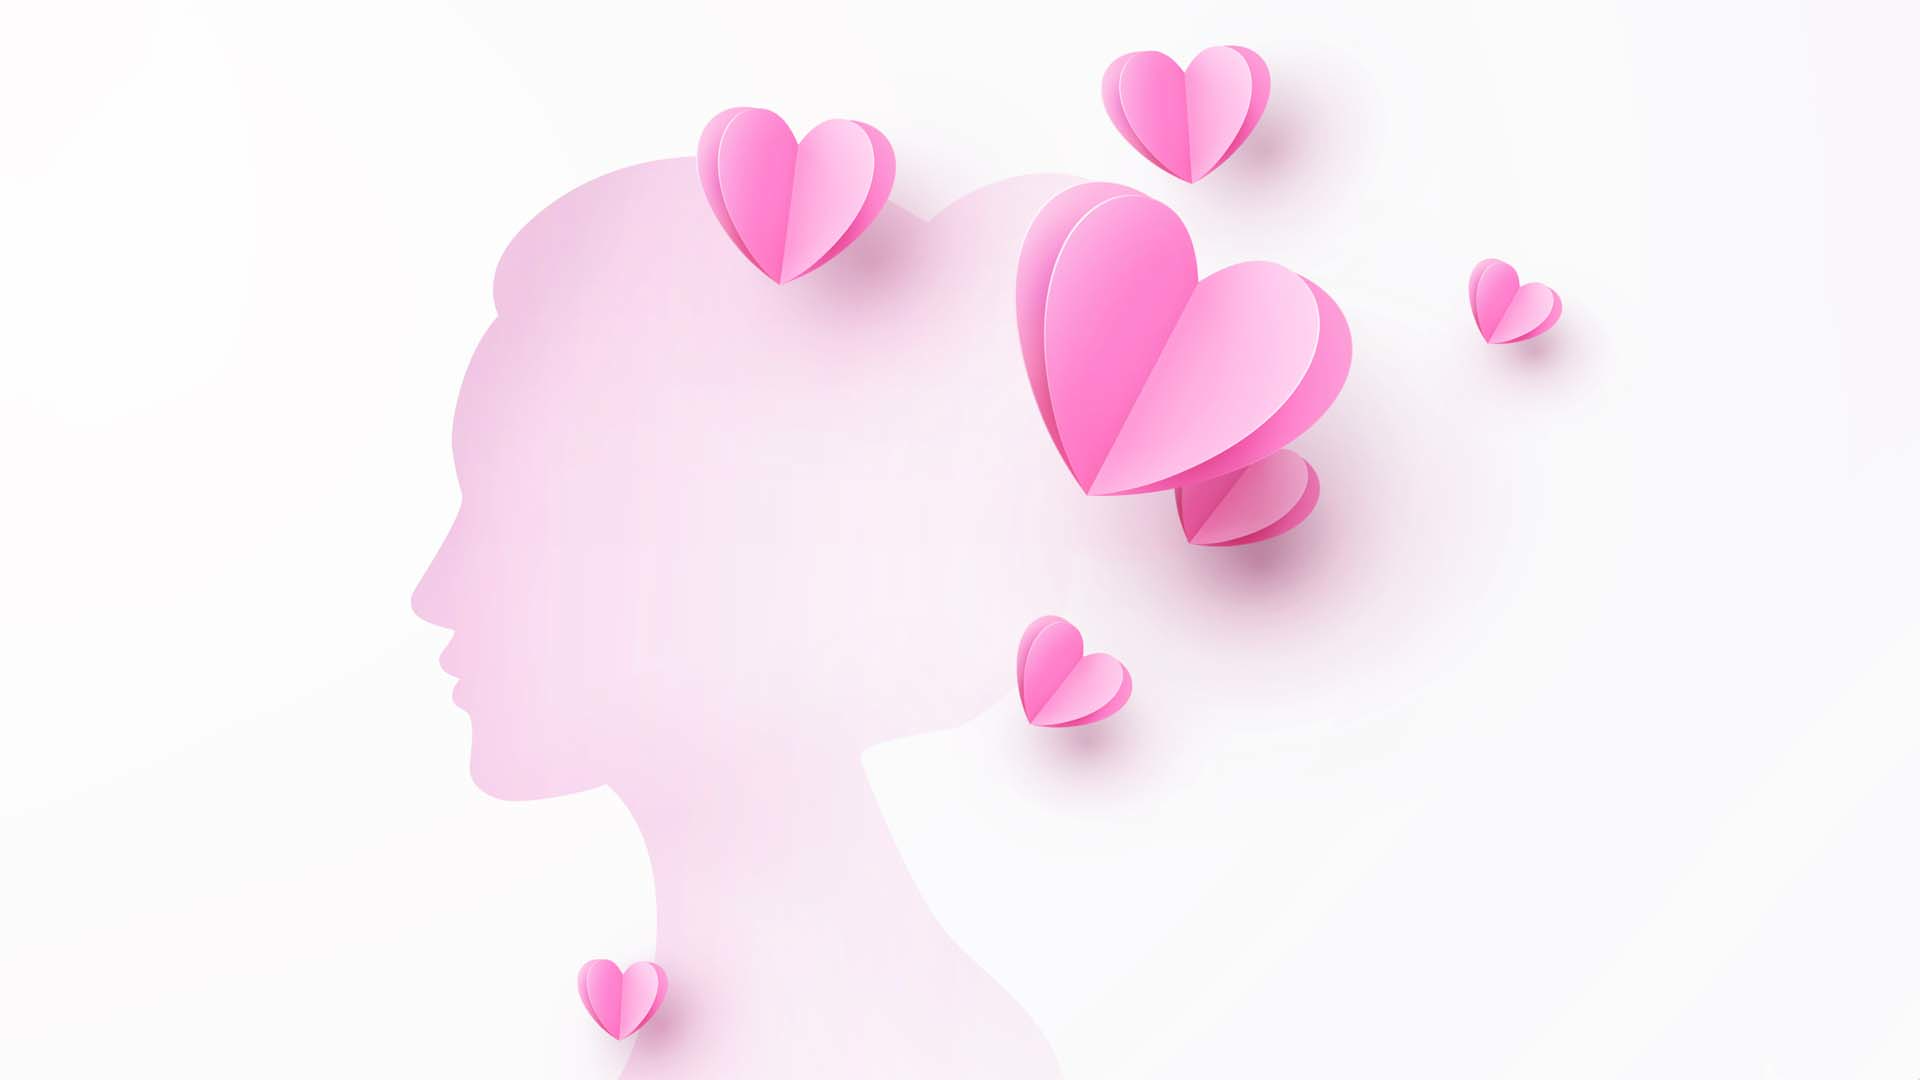 Illustration of silhouette profile of woman and pink hearts